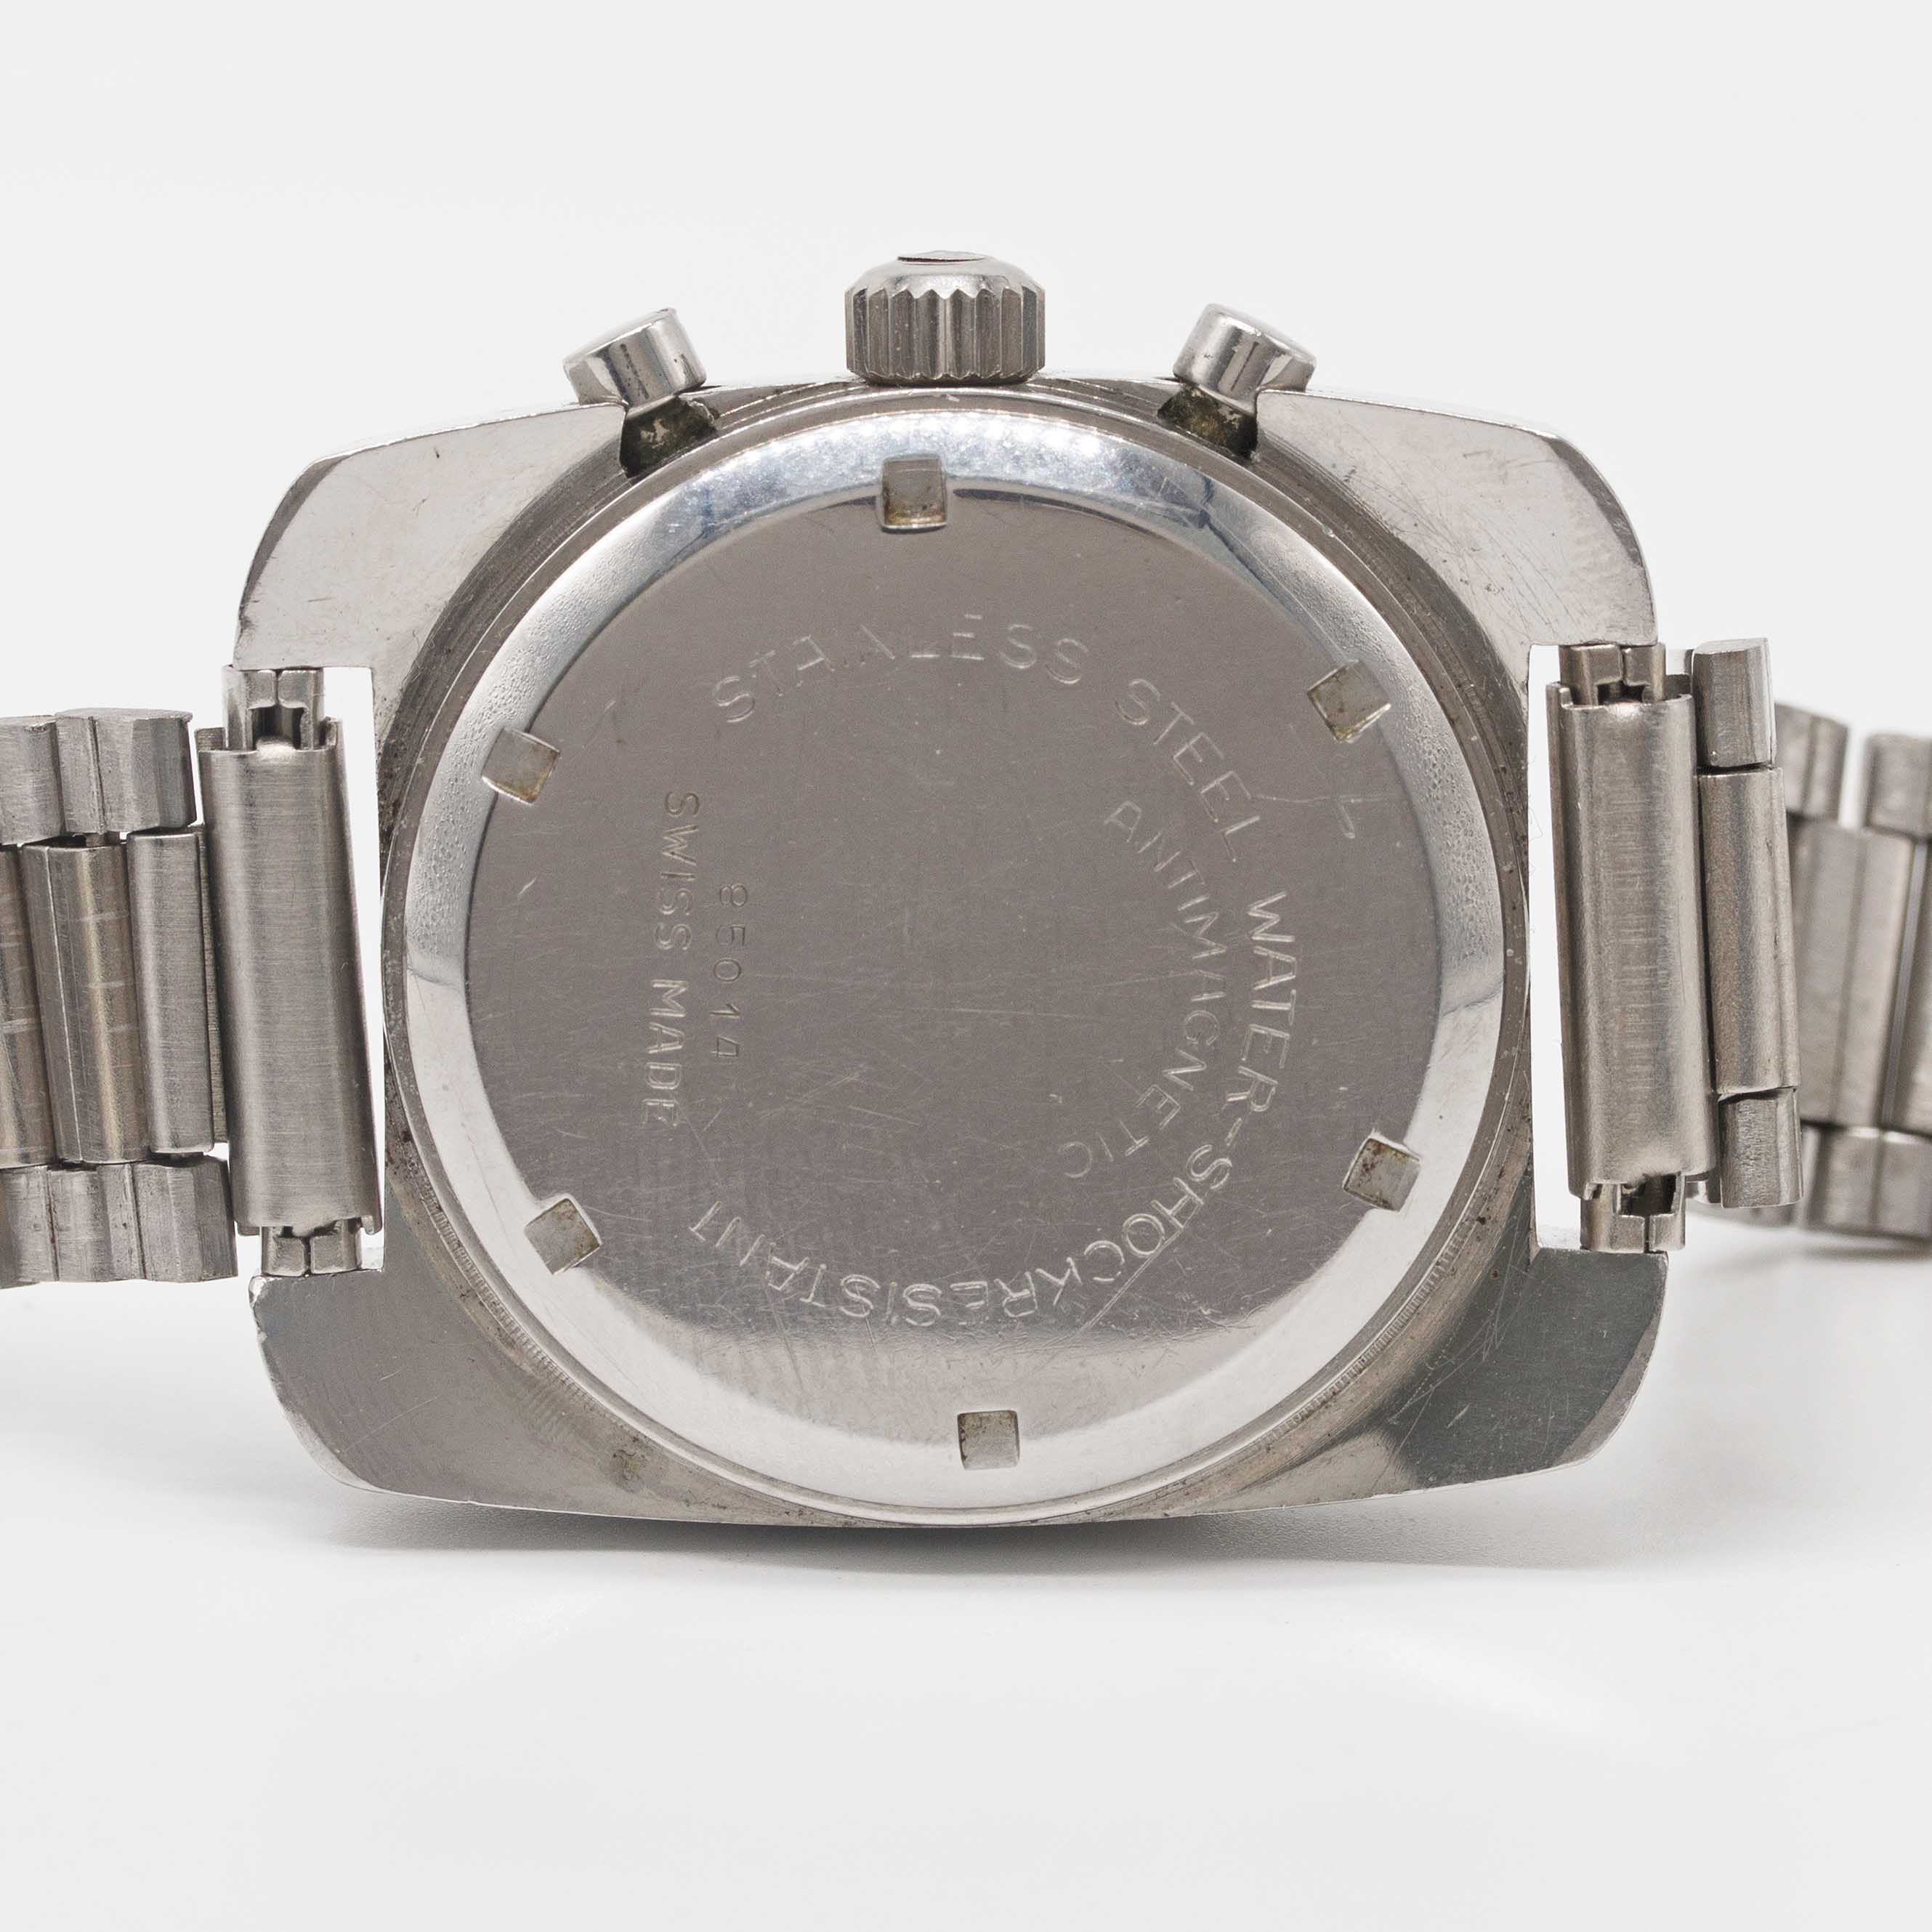 A GENTLEMAN'S STAINLESS STEEL NIVADA CHRONOGRAPH BRACELET WATCH CIRCA 1970, REF. 85014 WITH - Image 6 of 7